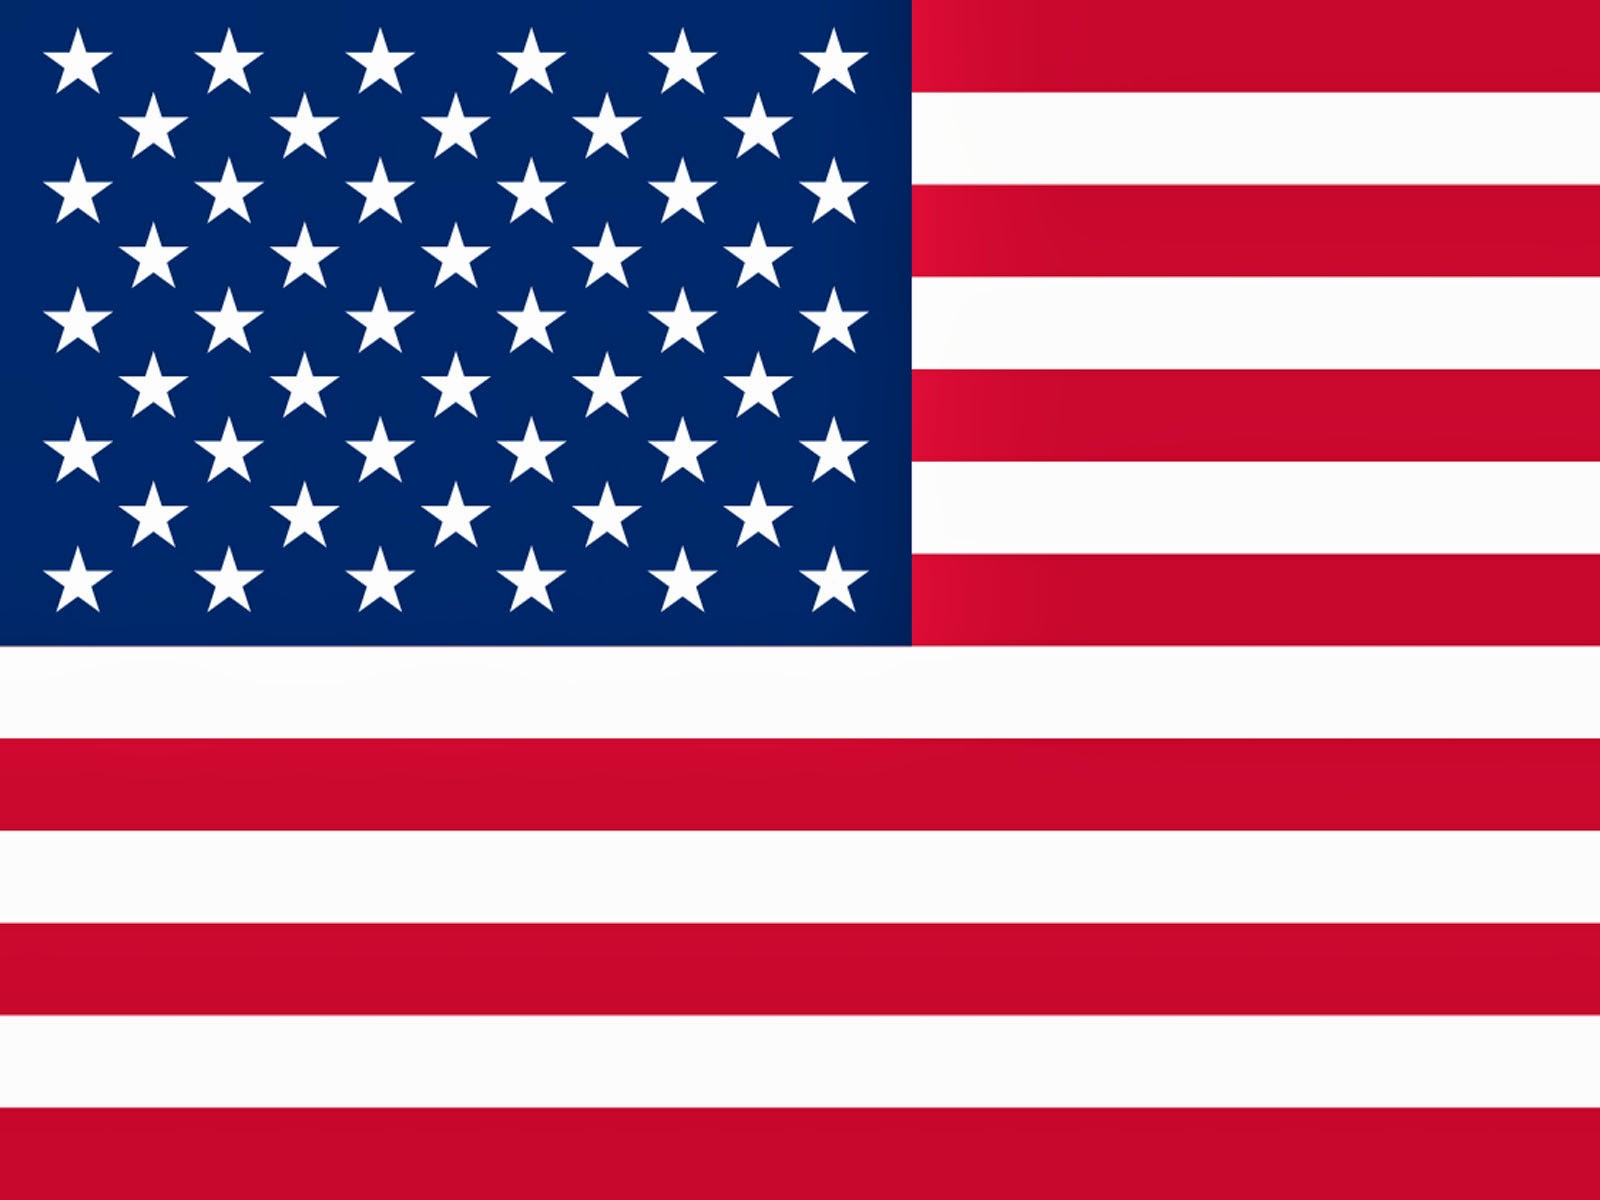 USA Flag Powerpoint Templates - PPT Backgrounds Templates